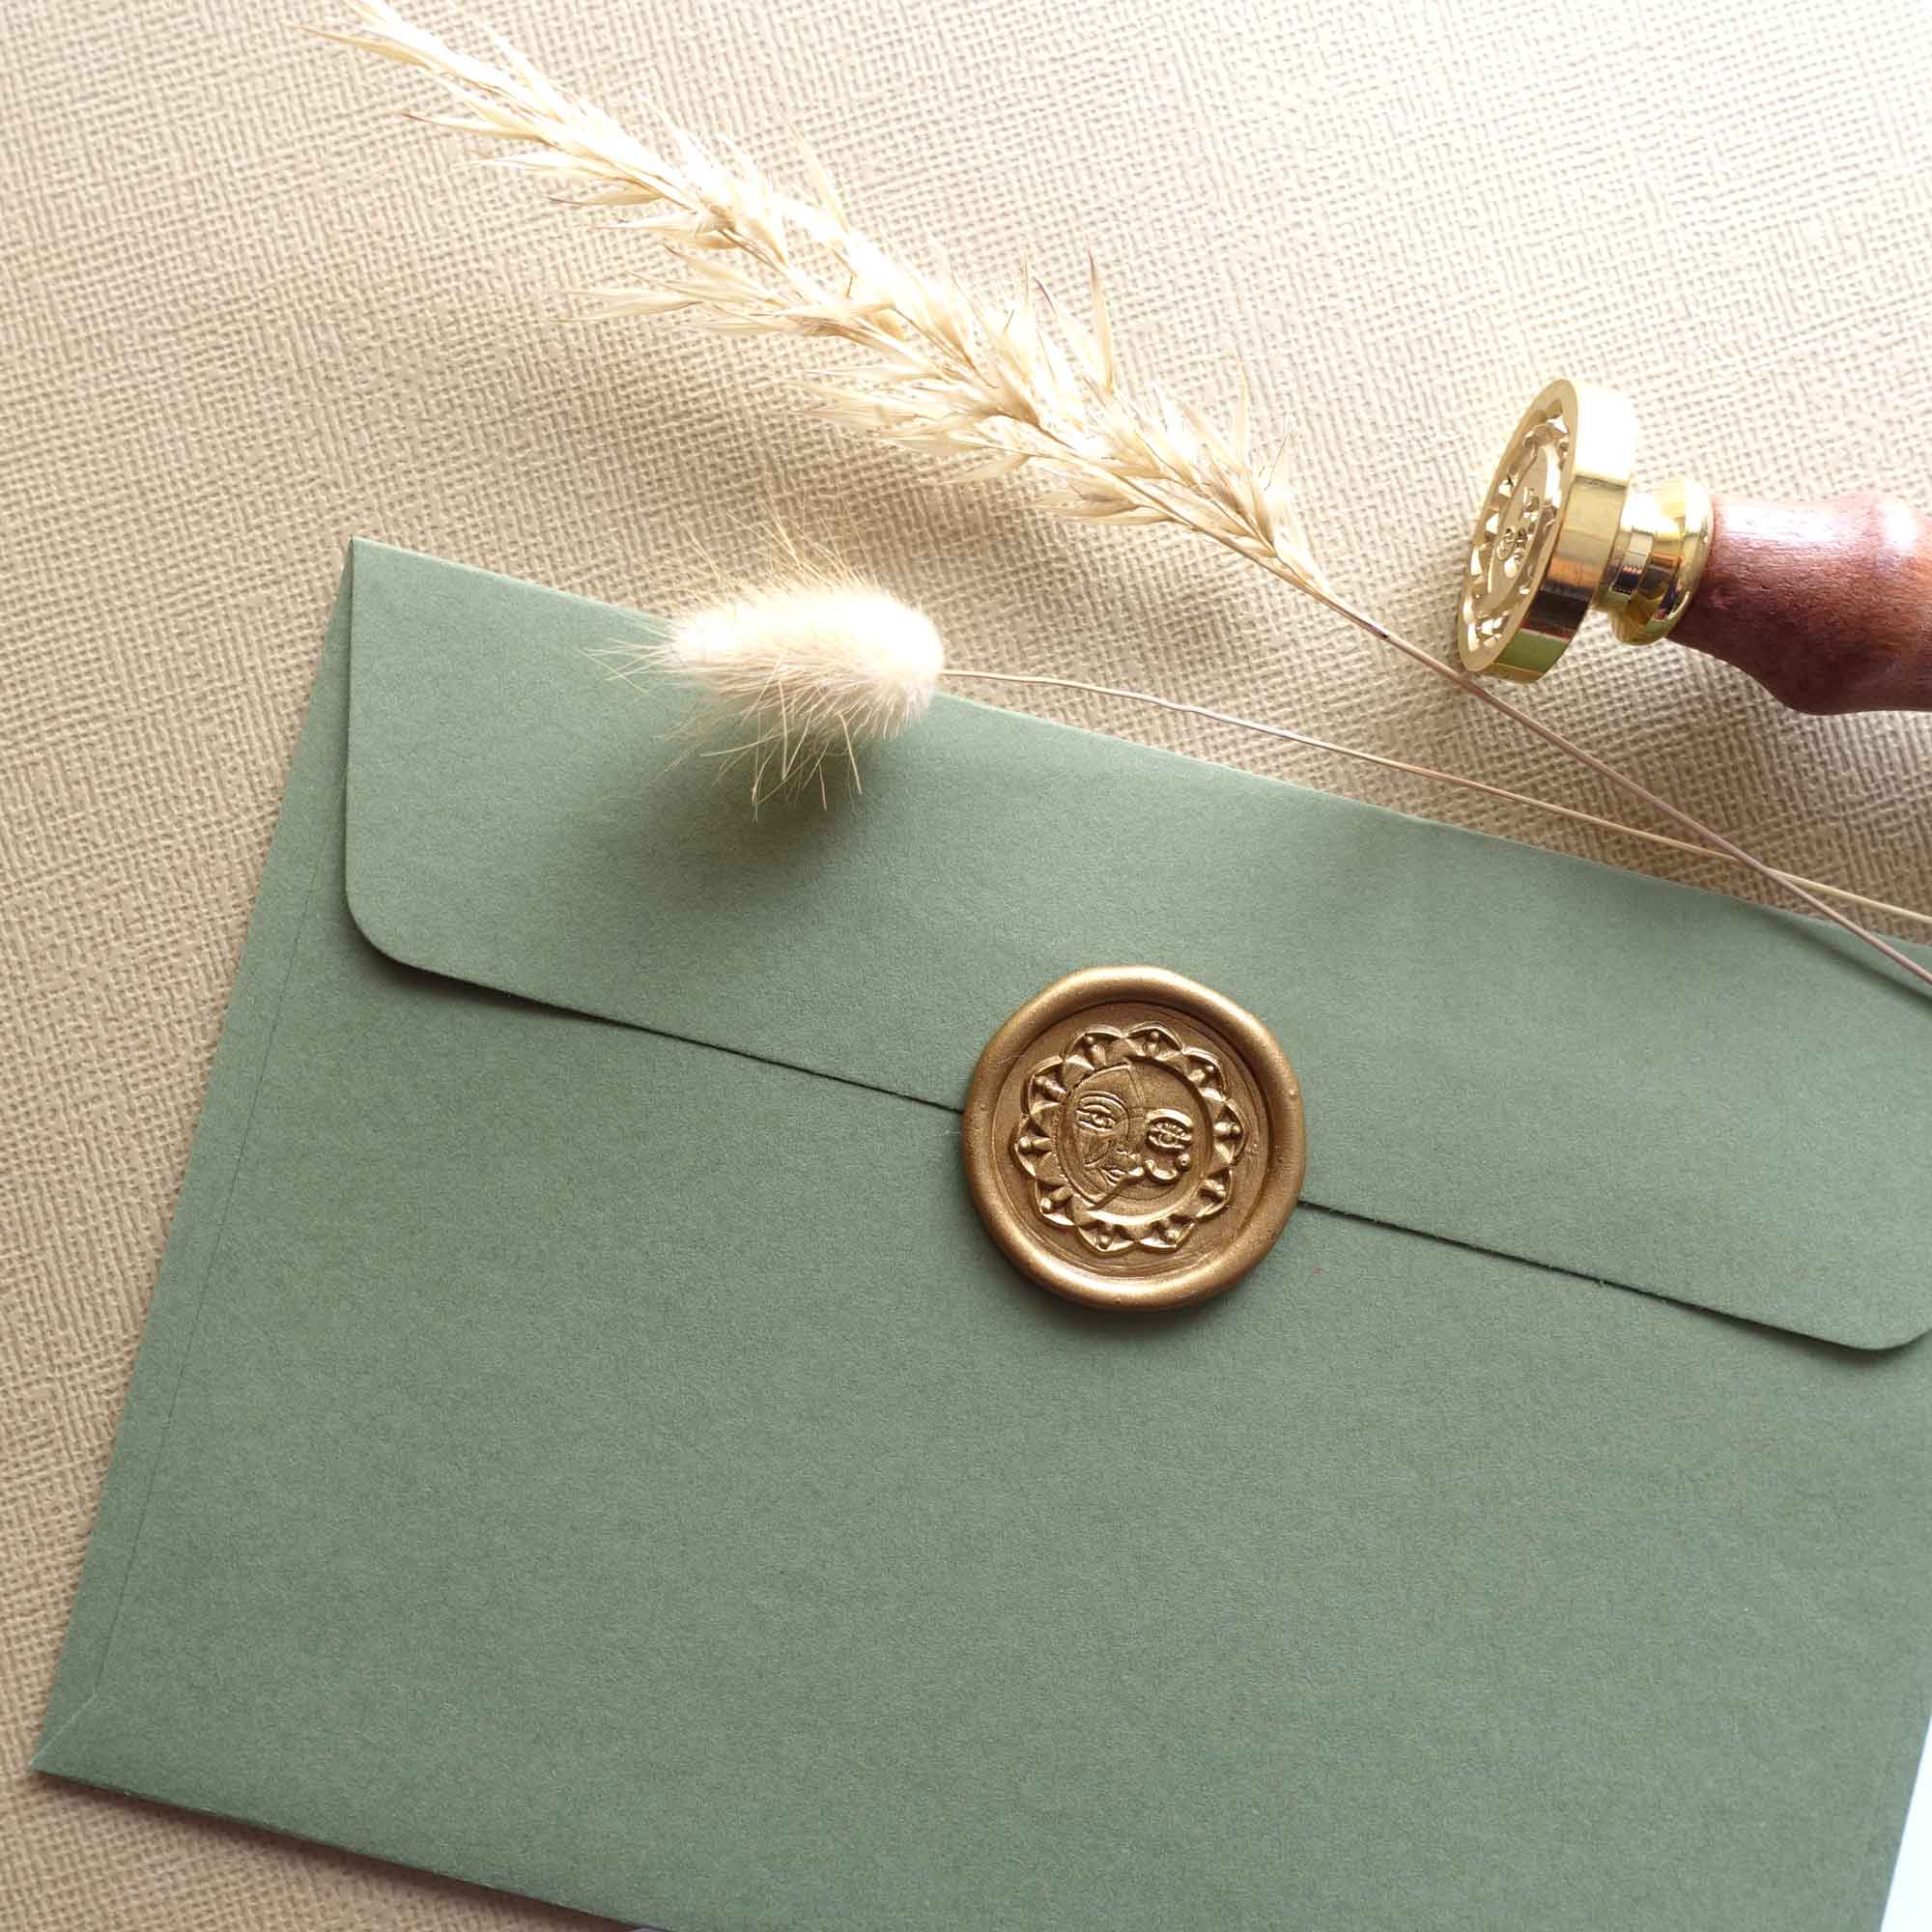 Antique gold half sun and crescent moon wax seal stamp on olive green envelope